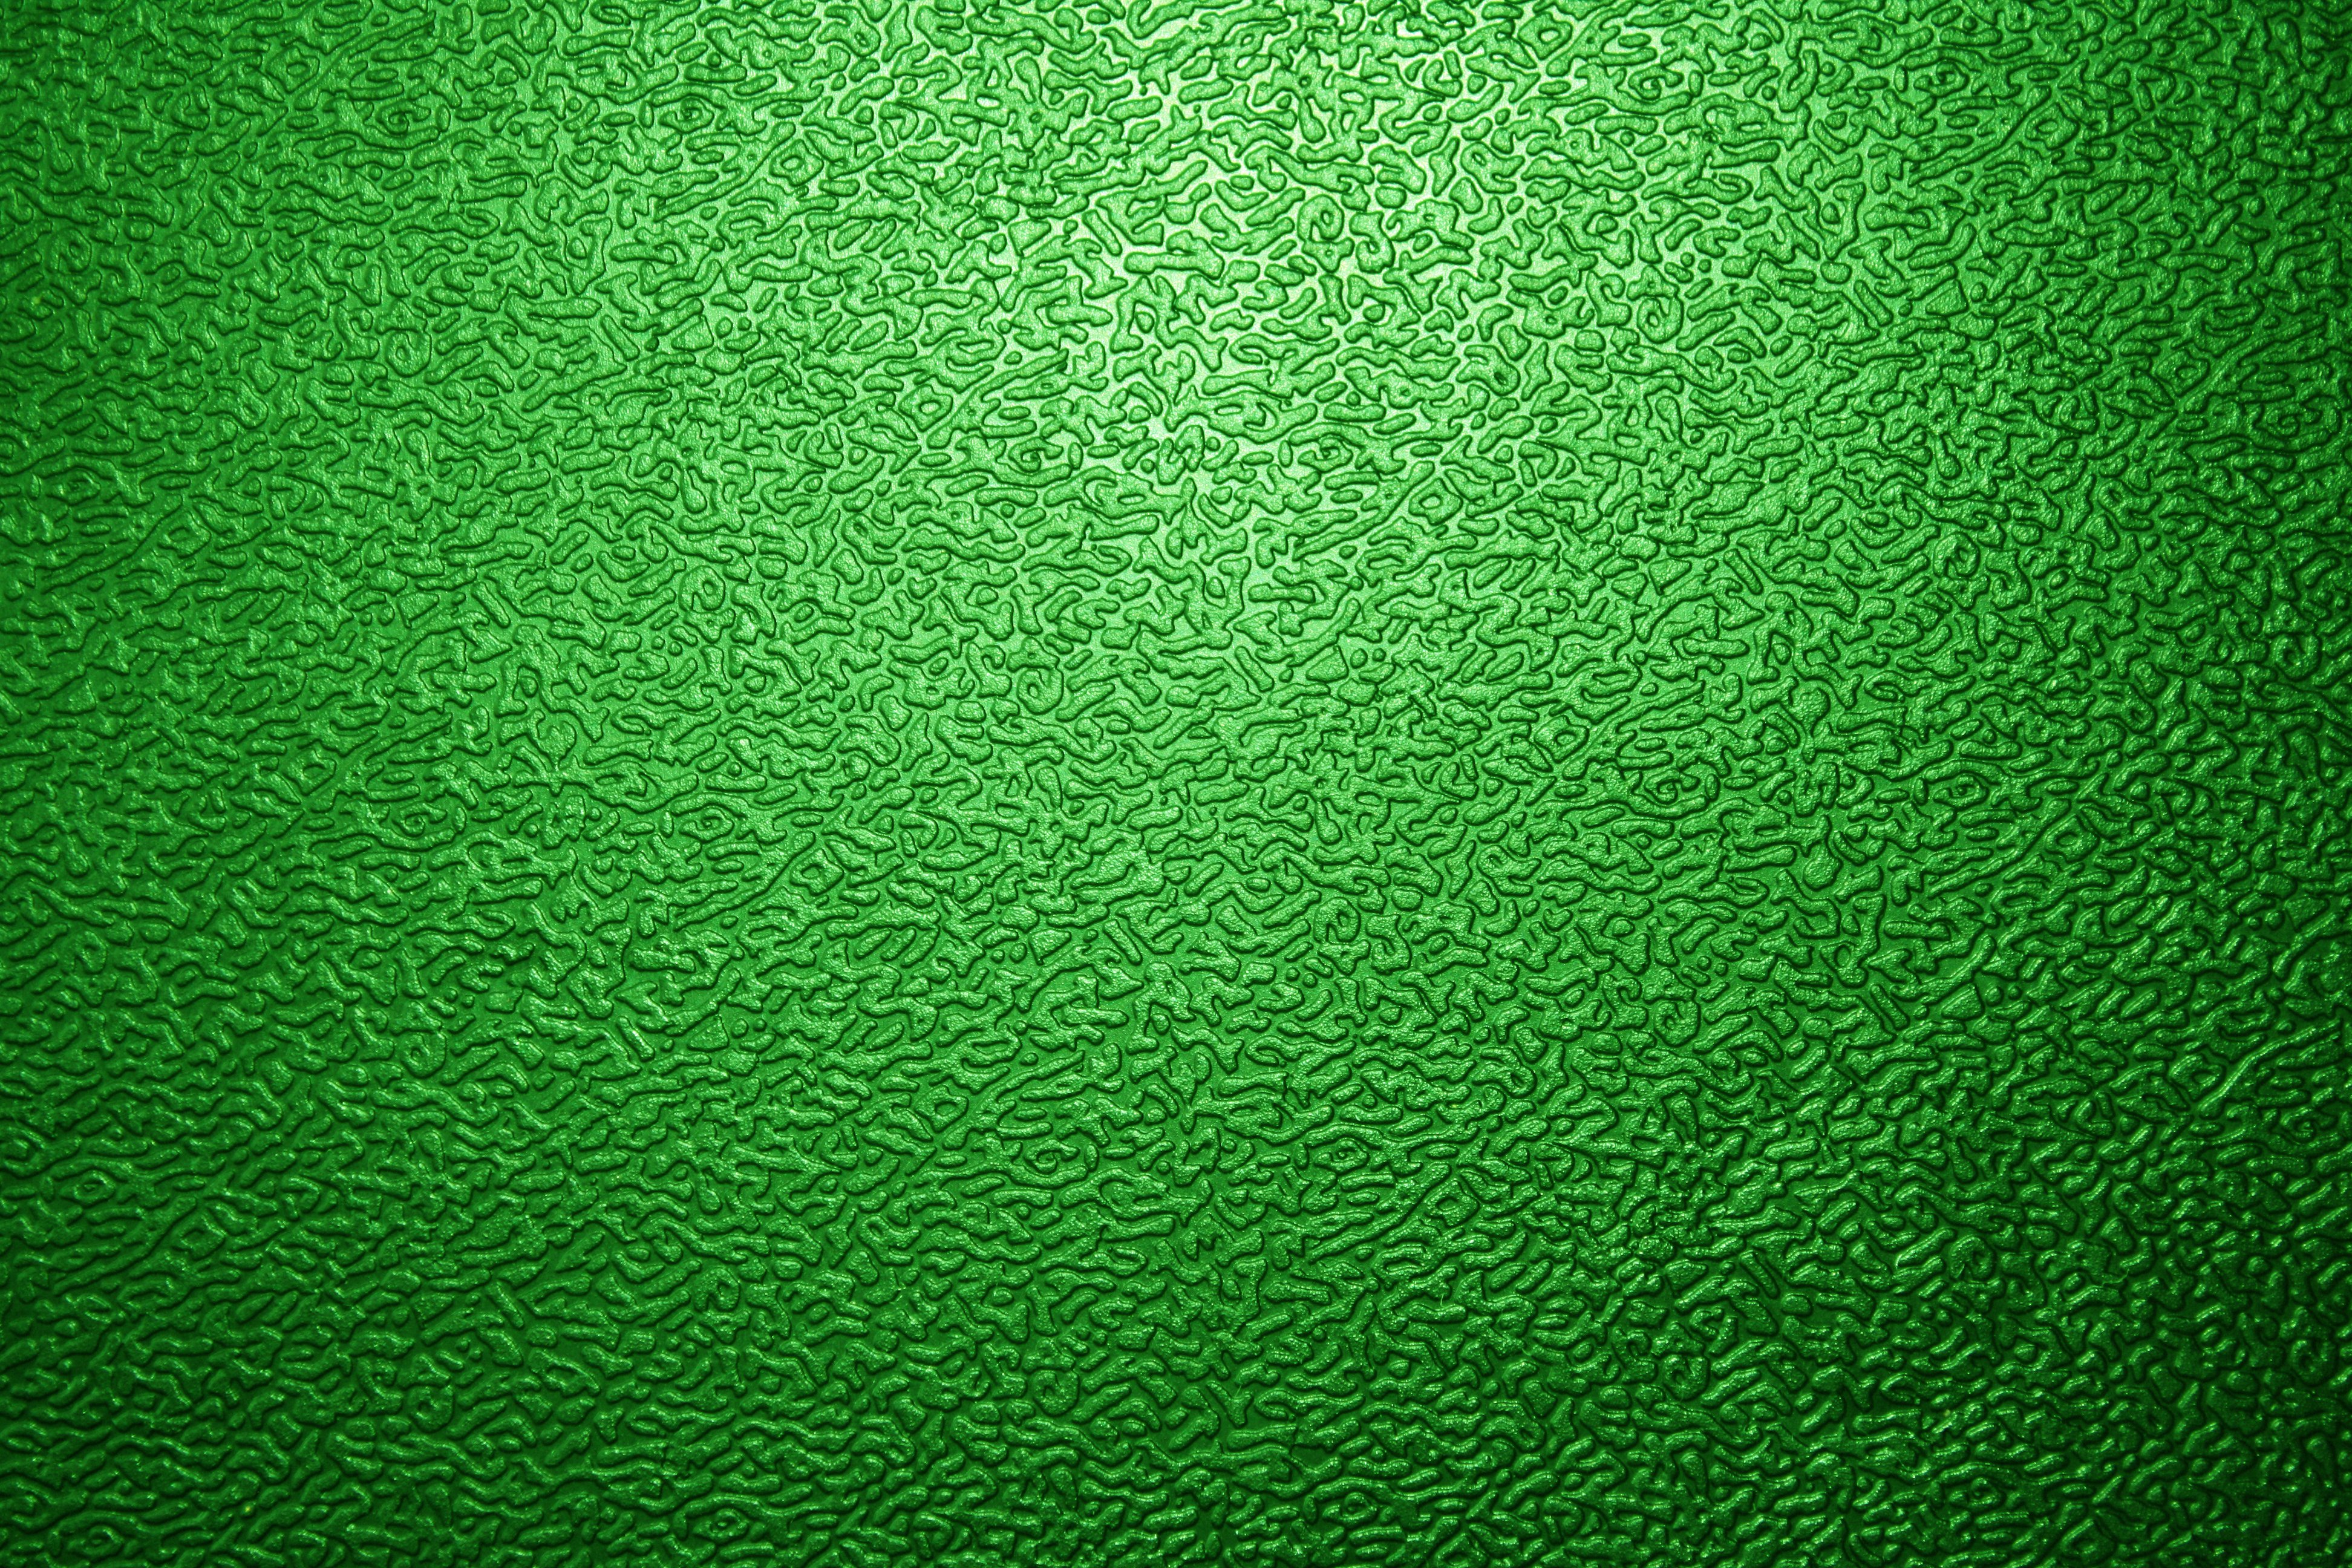 Textured Green Plastic Close Up Picture Photograph Photos